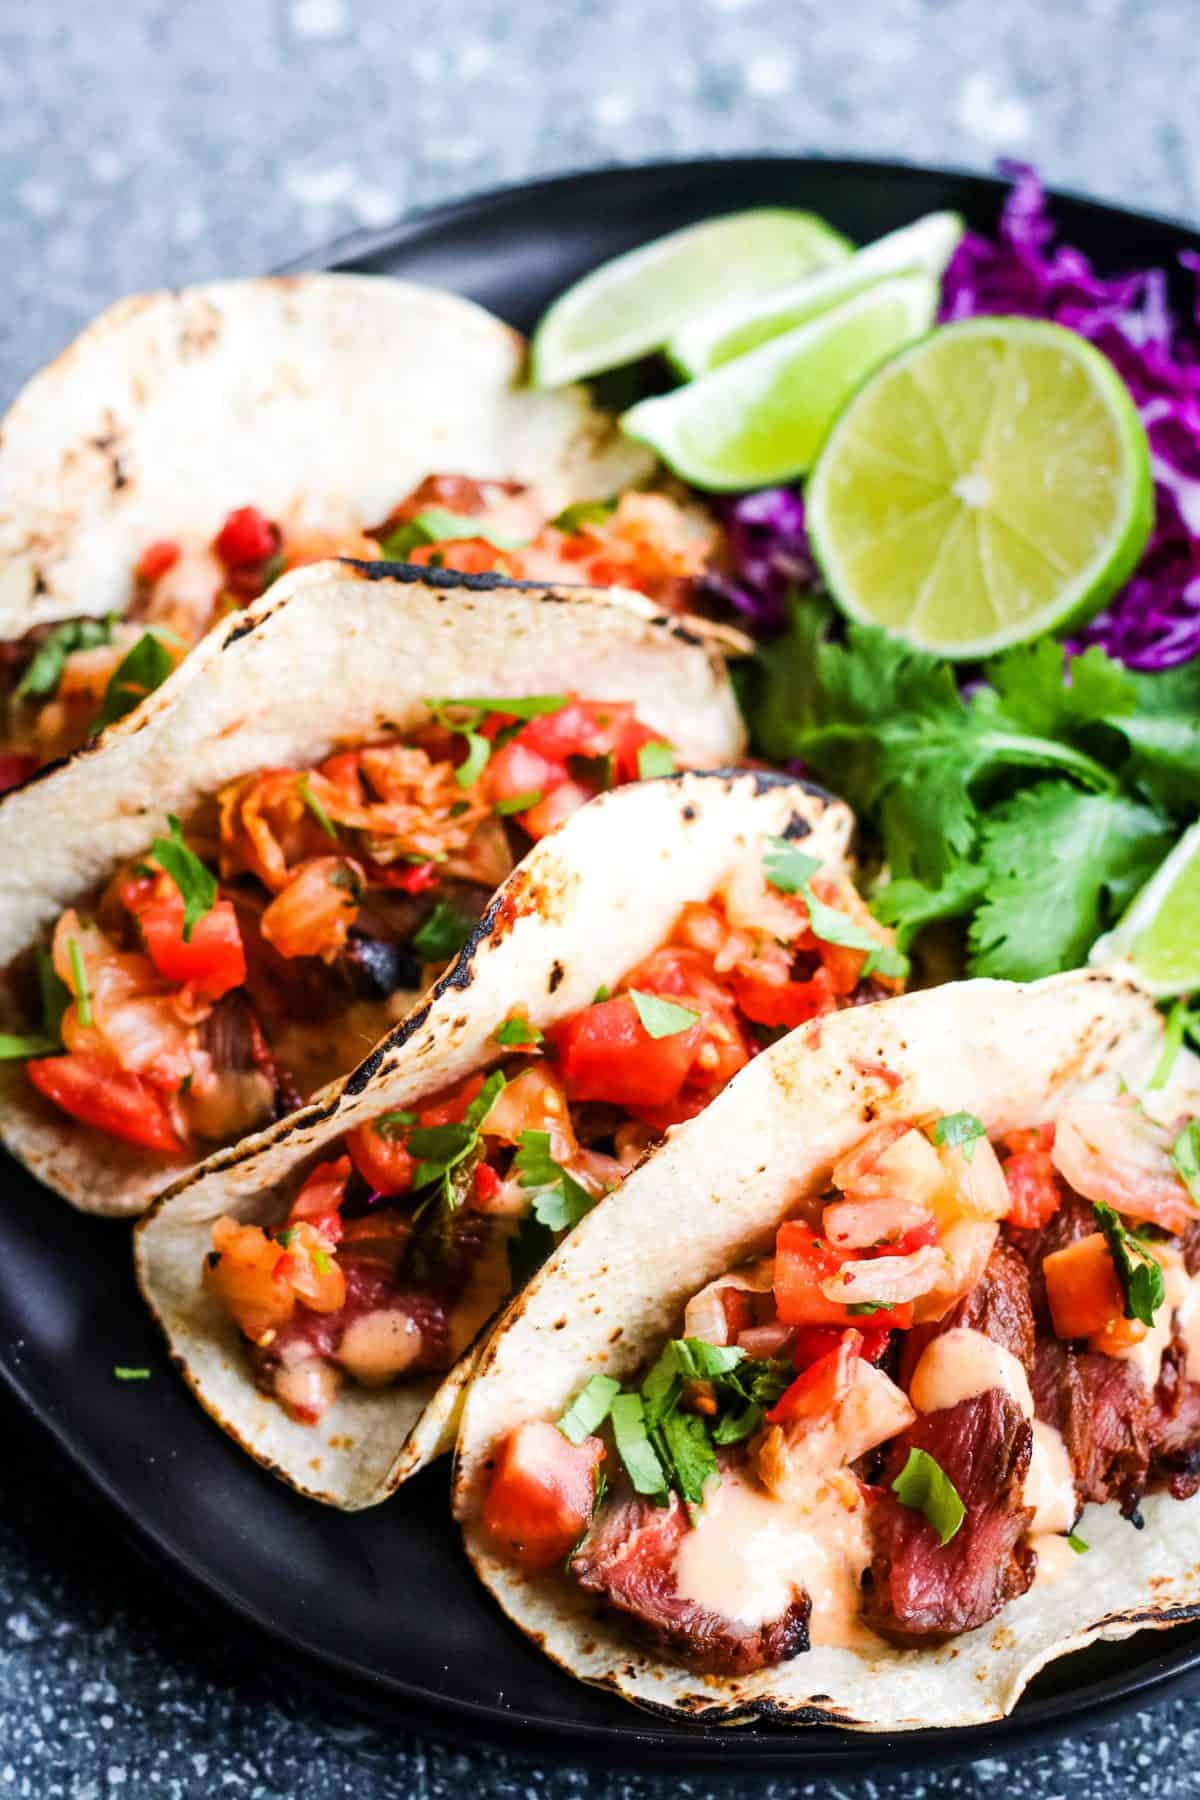 Vertical shot shot of 4 korean tacos: corn tortillas filled with sliced steak, kimchi and pico de gallo salsa, and chopped cilantro. In the background are lime wedges, sliced red cabbage, cilantro leaves, and corn tortillas.